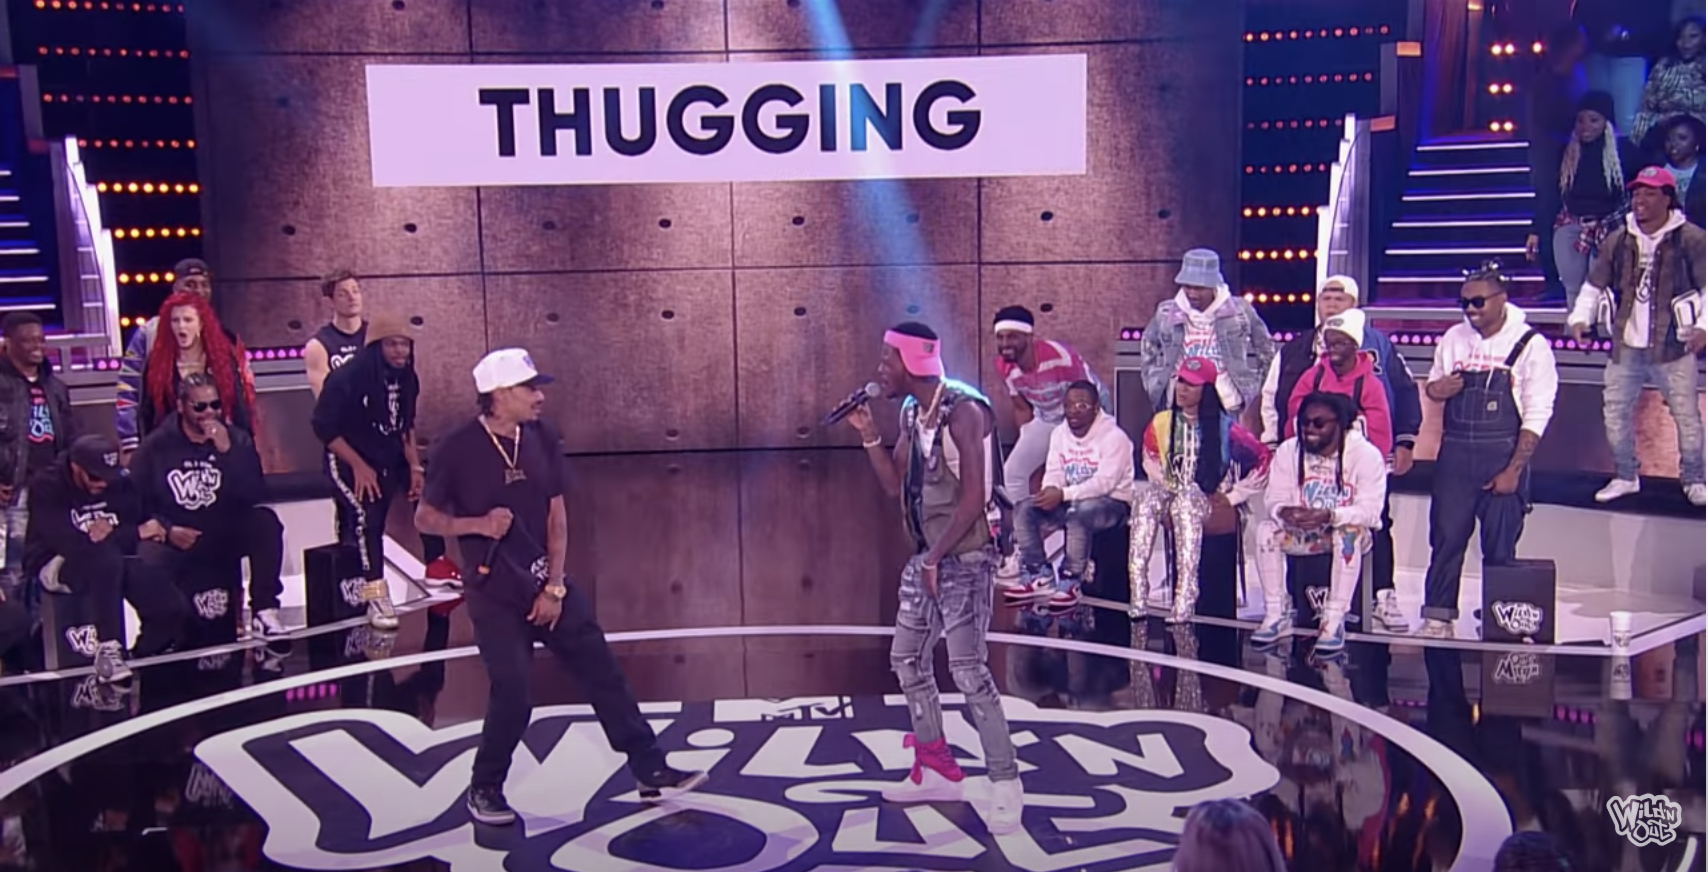 Nick Cannon Presents: Wild 'N Out 15th season featuring guest stars Bone Thugs-N-Harmony